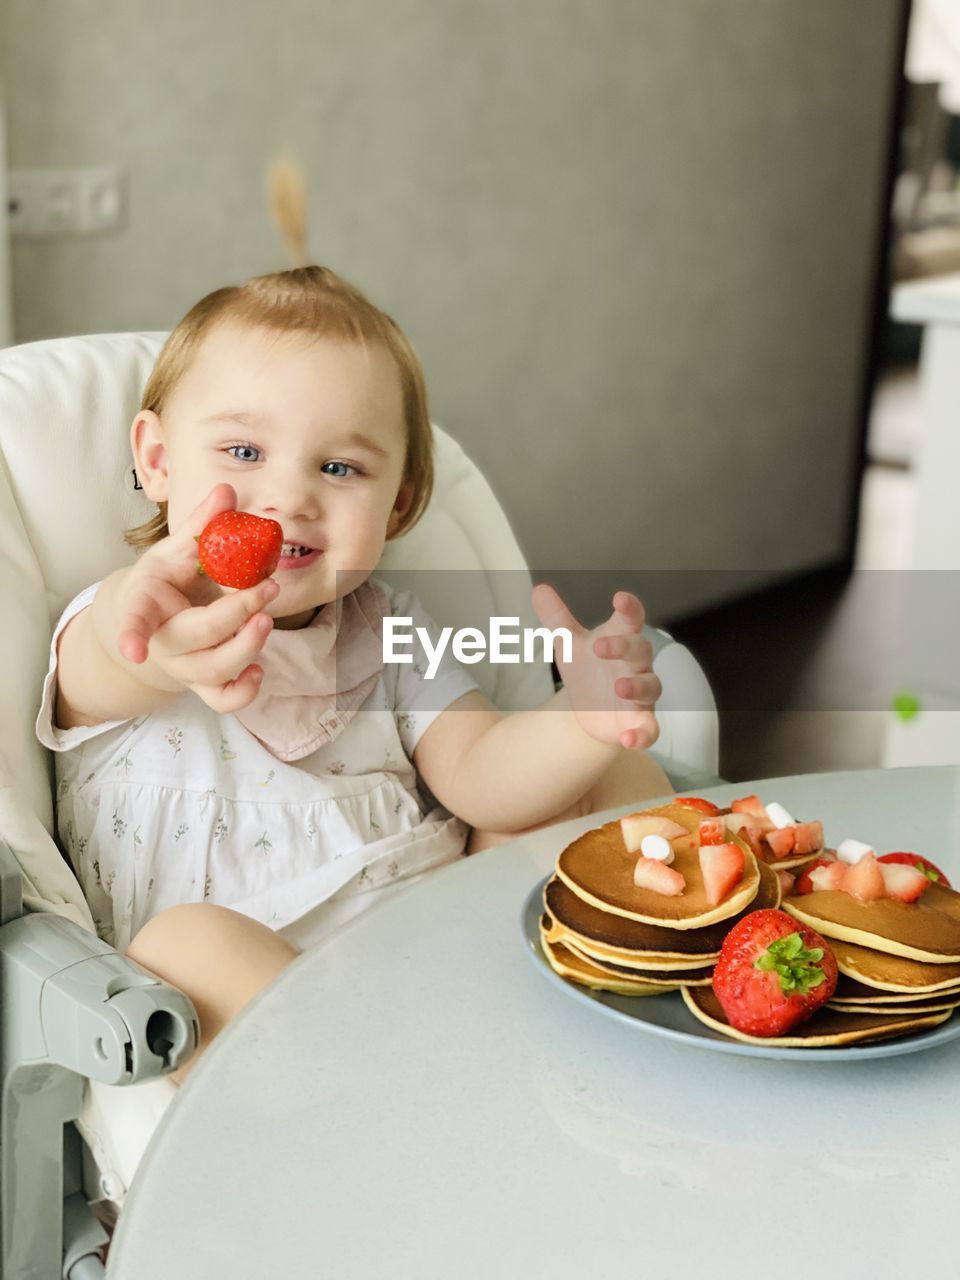 Girl eating berries and pancakes in plate on table